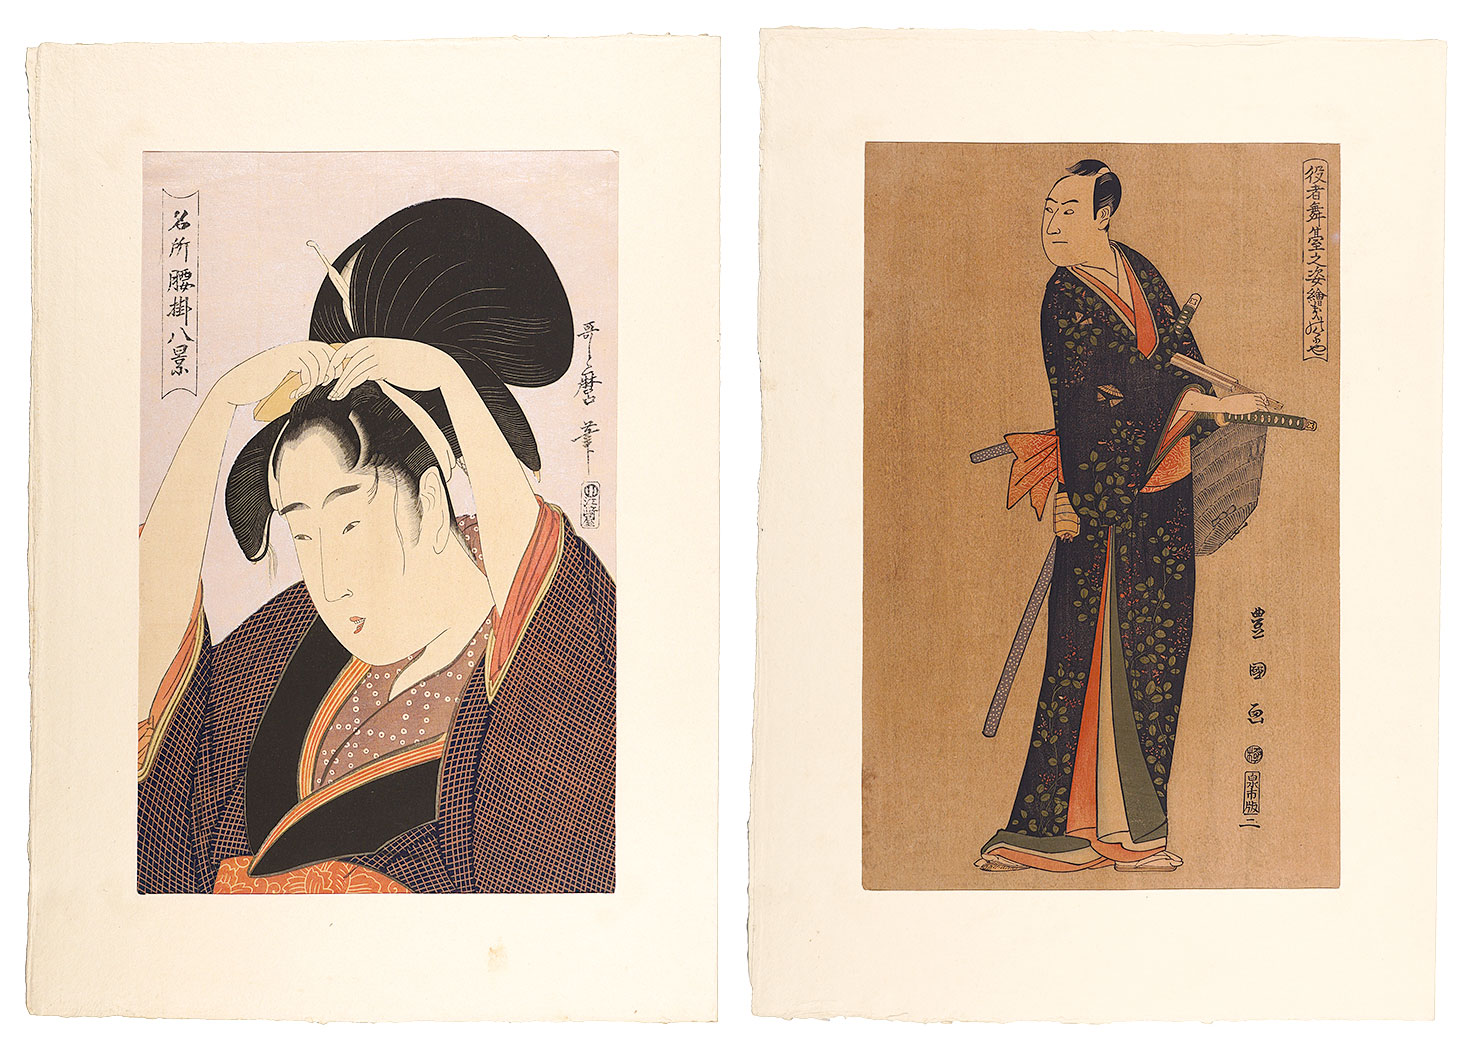 Utamaro, Toyokuni I ｢Beauty with Comb, from the series ''Eight Views of Famous Tea-stalls in Celebrated Places